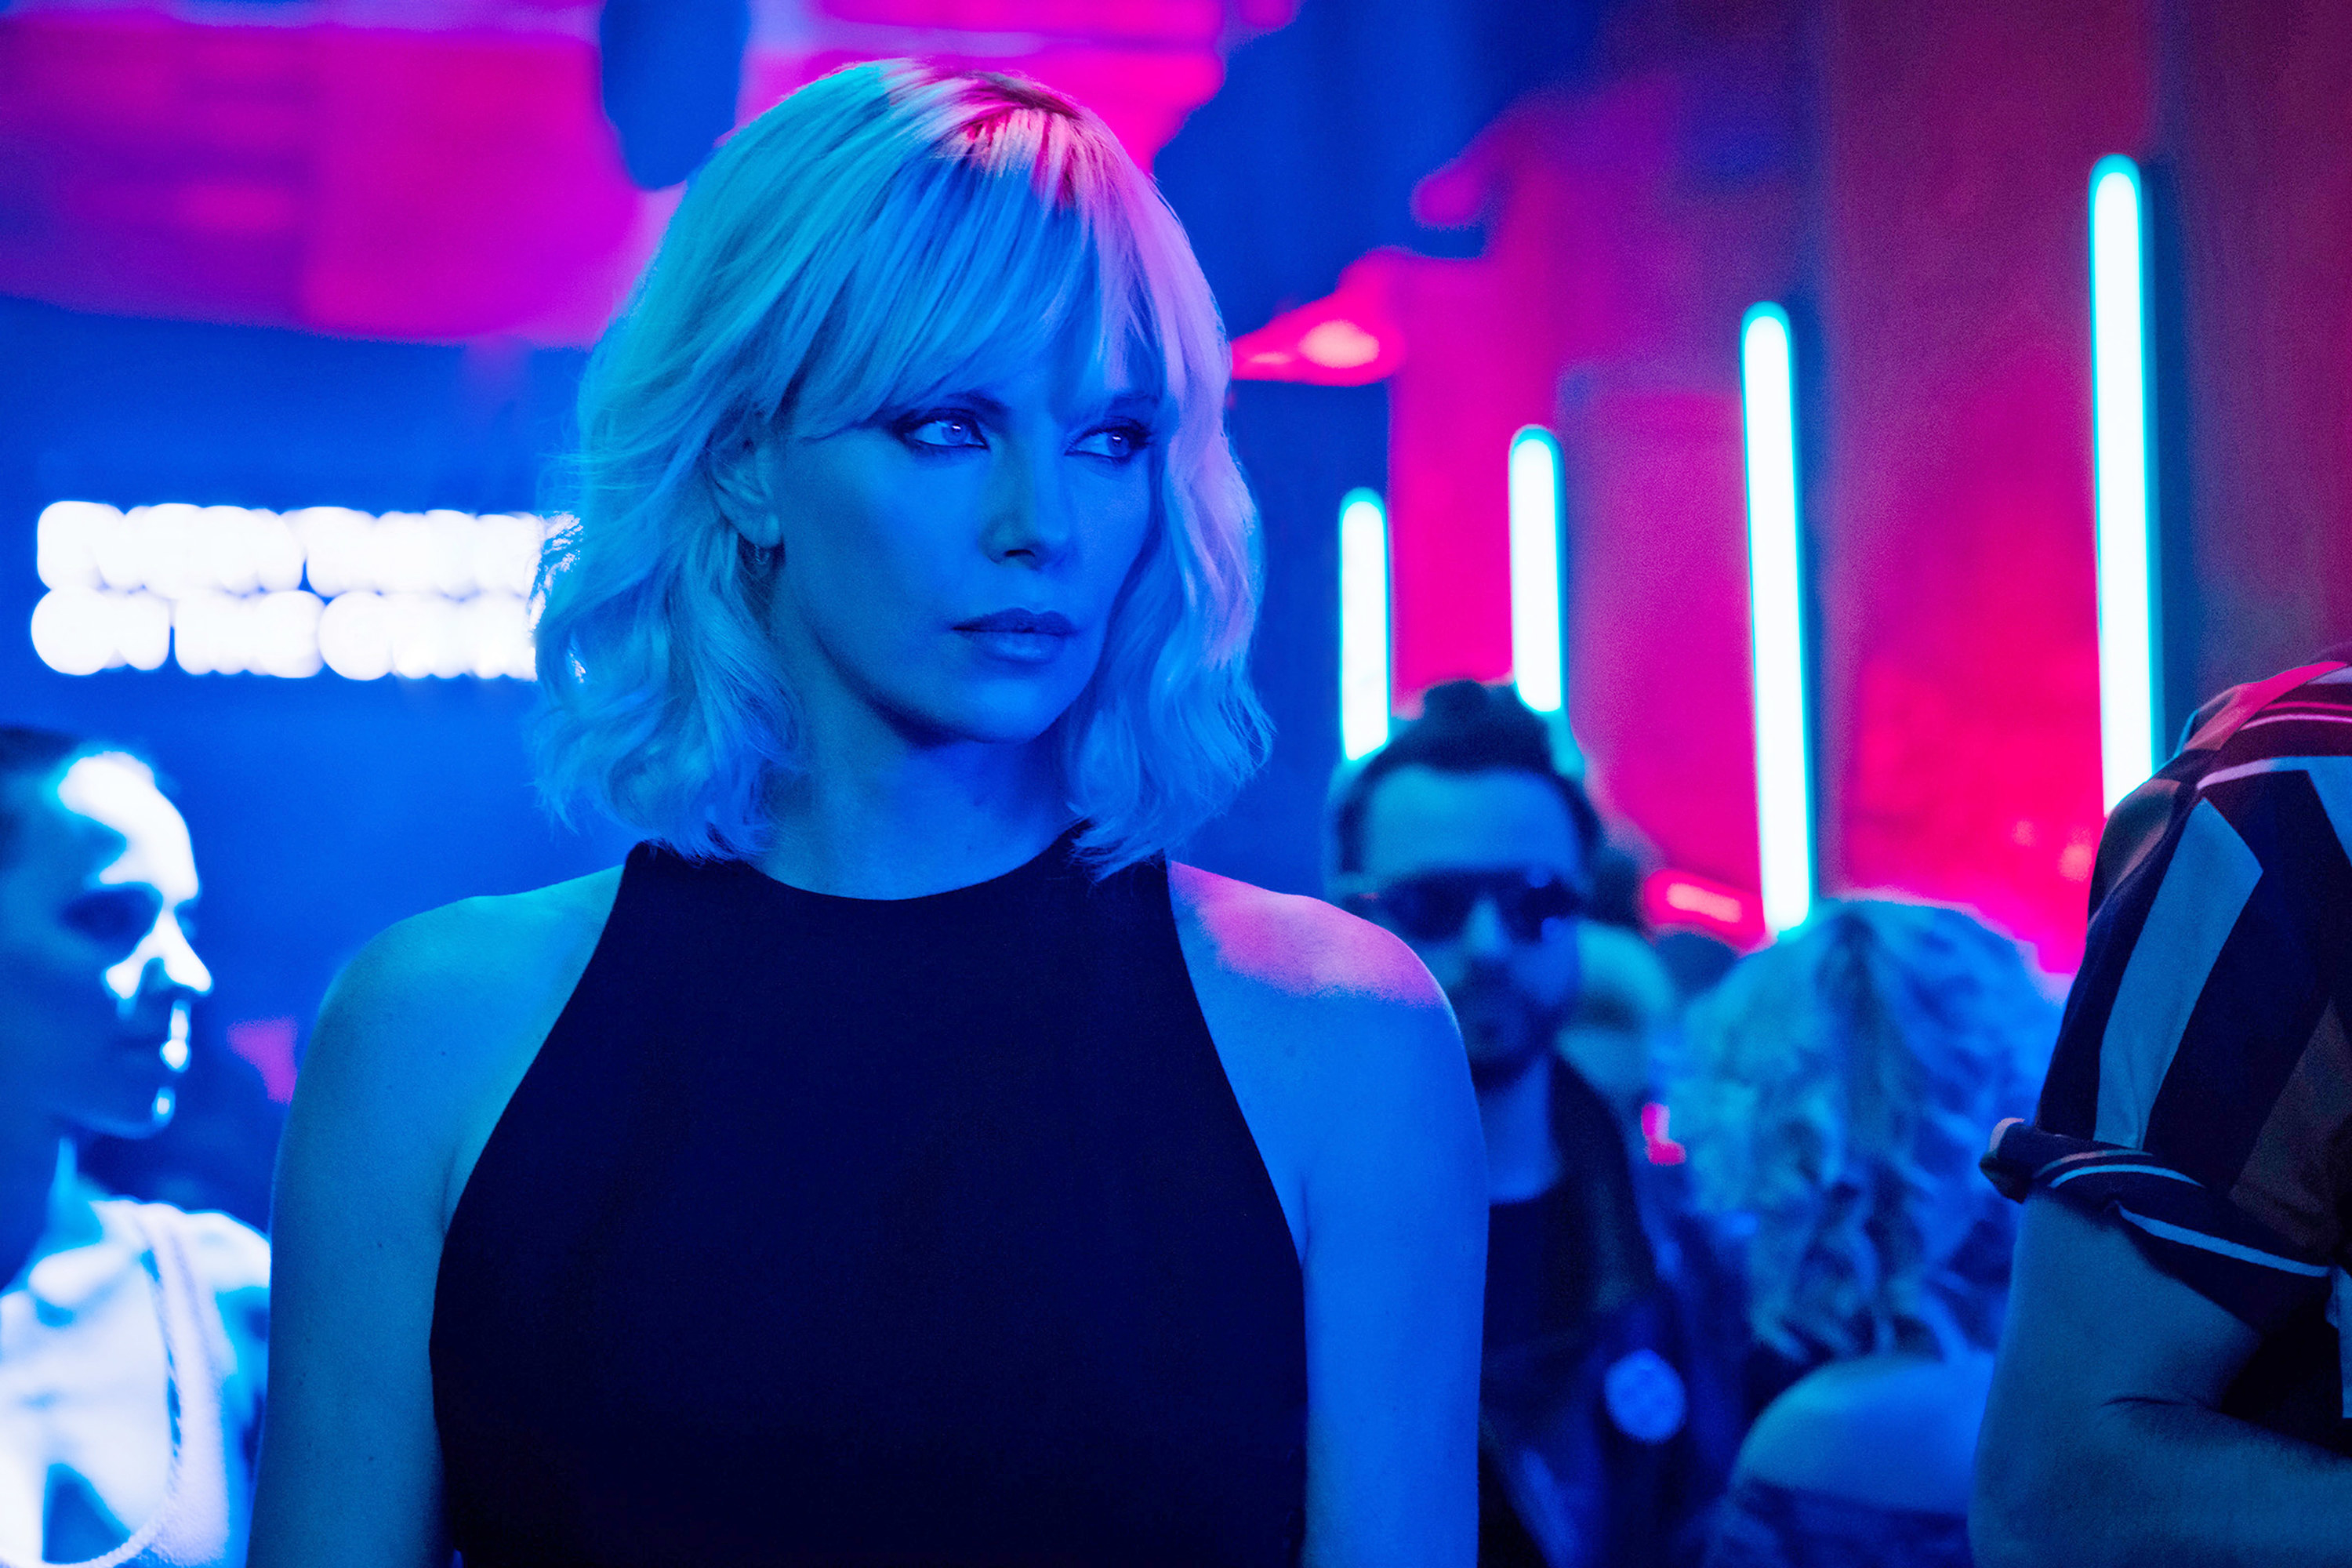 Charlize Theron keeps a vigilant watch over a nightclub in &quot;Atomic Blonde&quot;